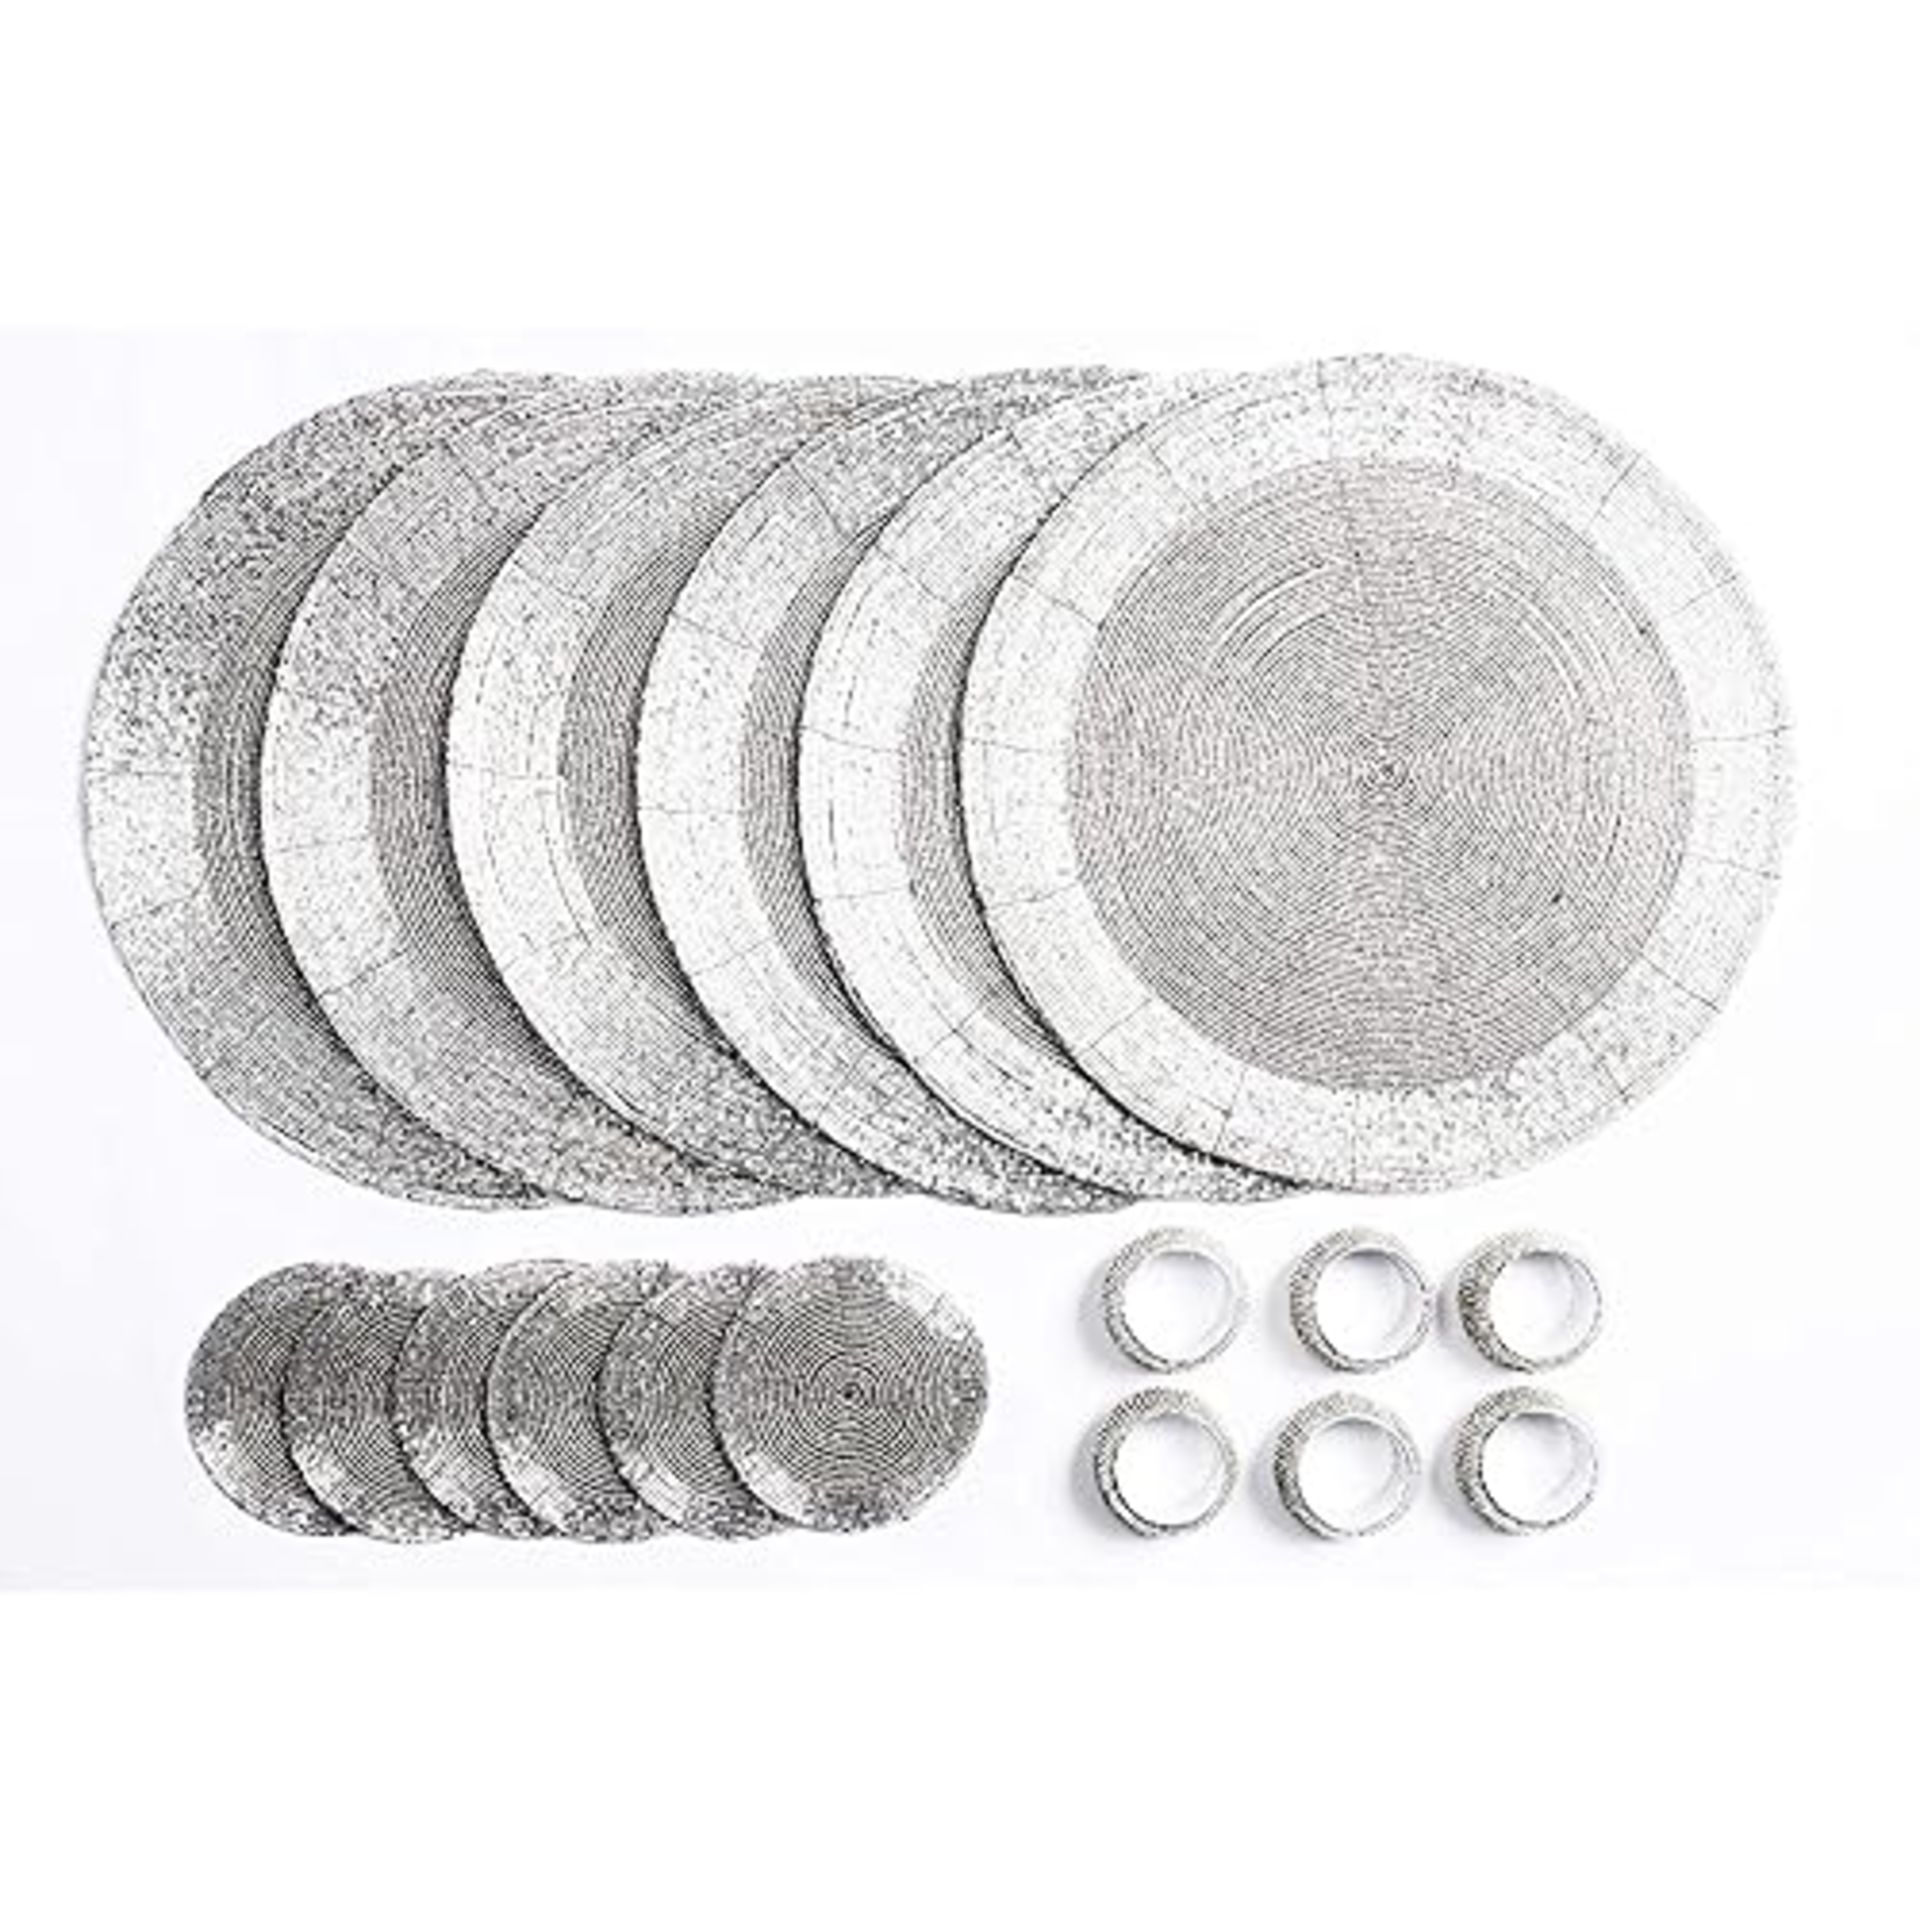 Penguin Home Set of 18 Handcrafted Glass Beaded Placemats, Coasters and Napkin Rings in Silver Colo